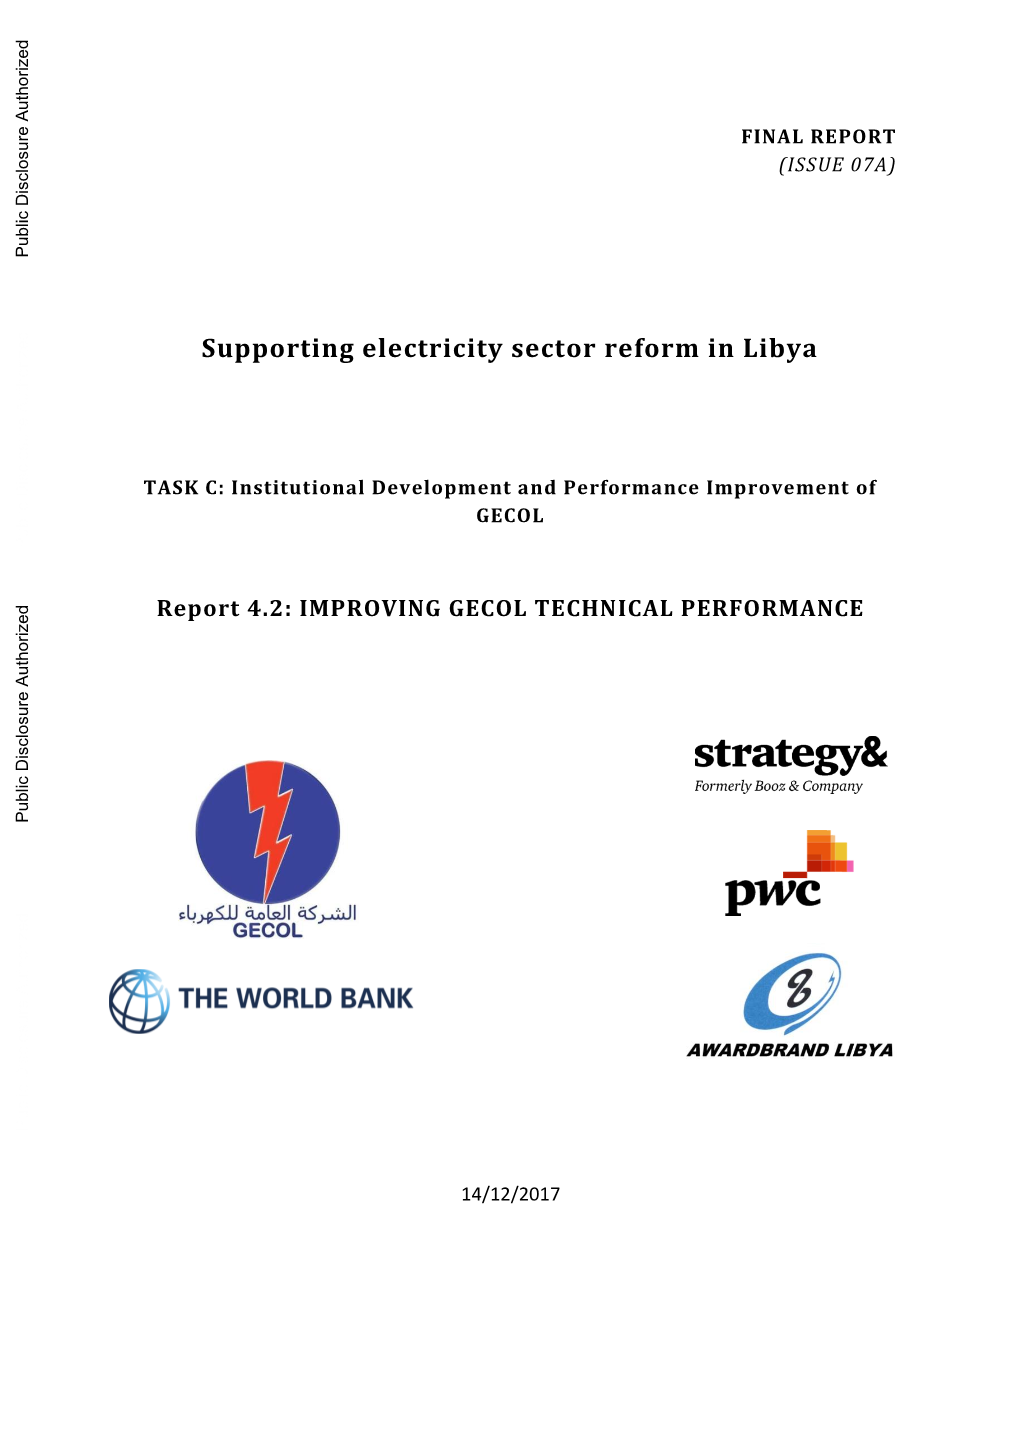 Supporting Electricity Sector Reform in Libya